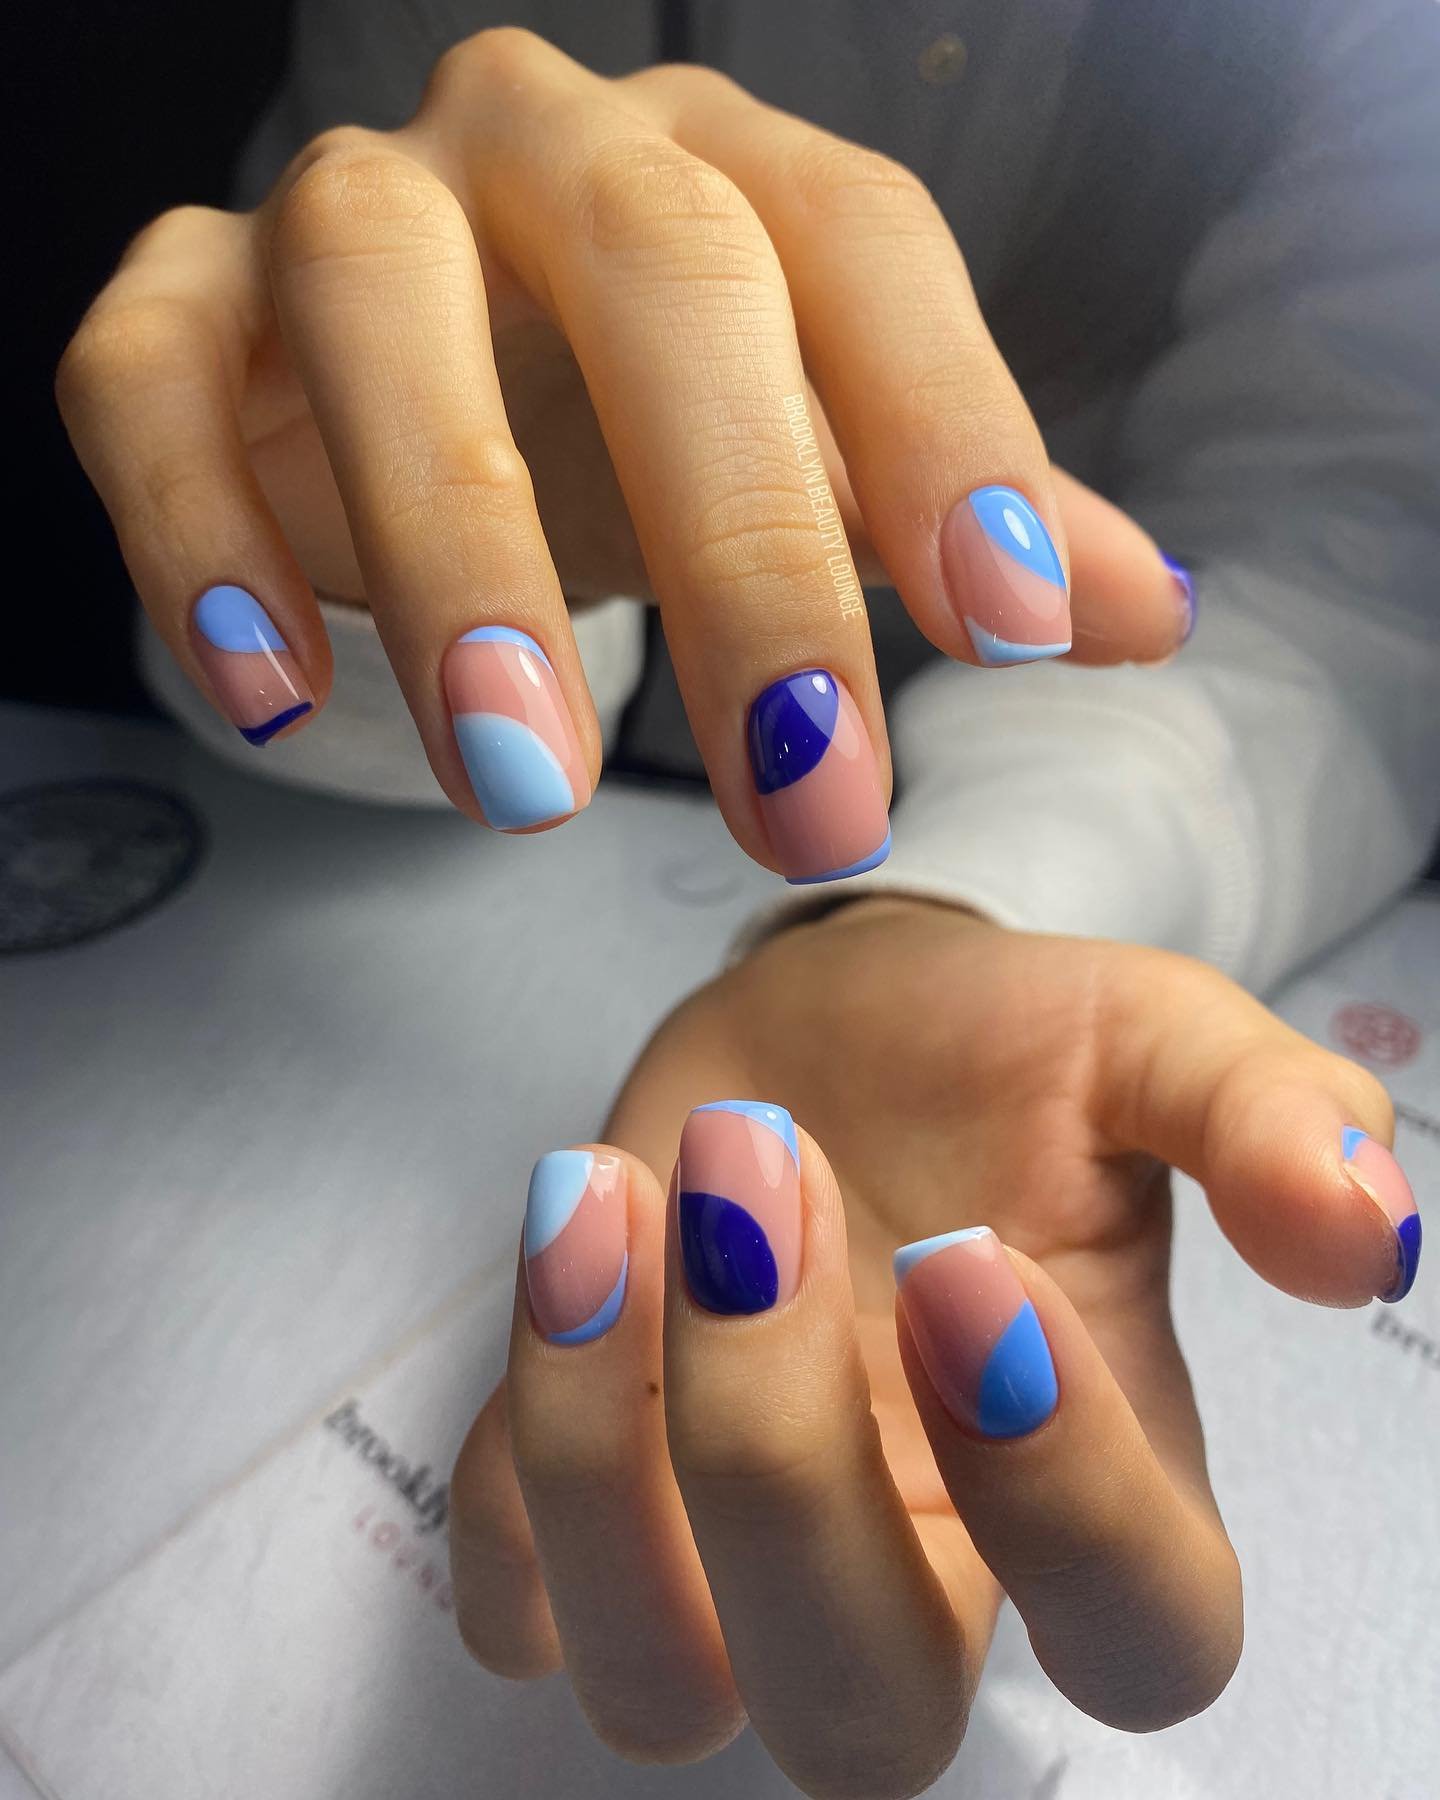 26 - Picture of Blue Nails